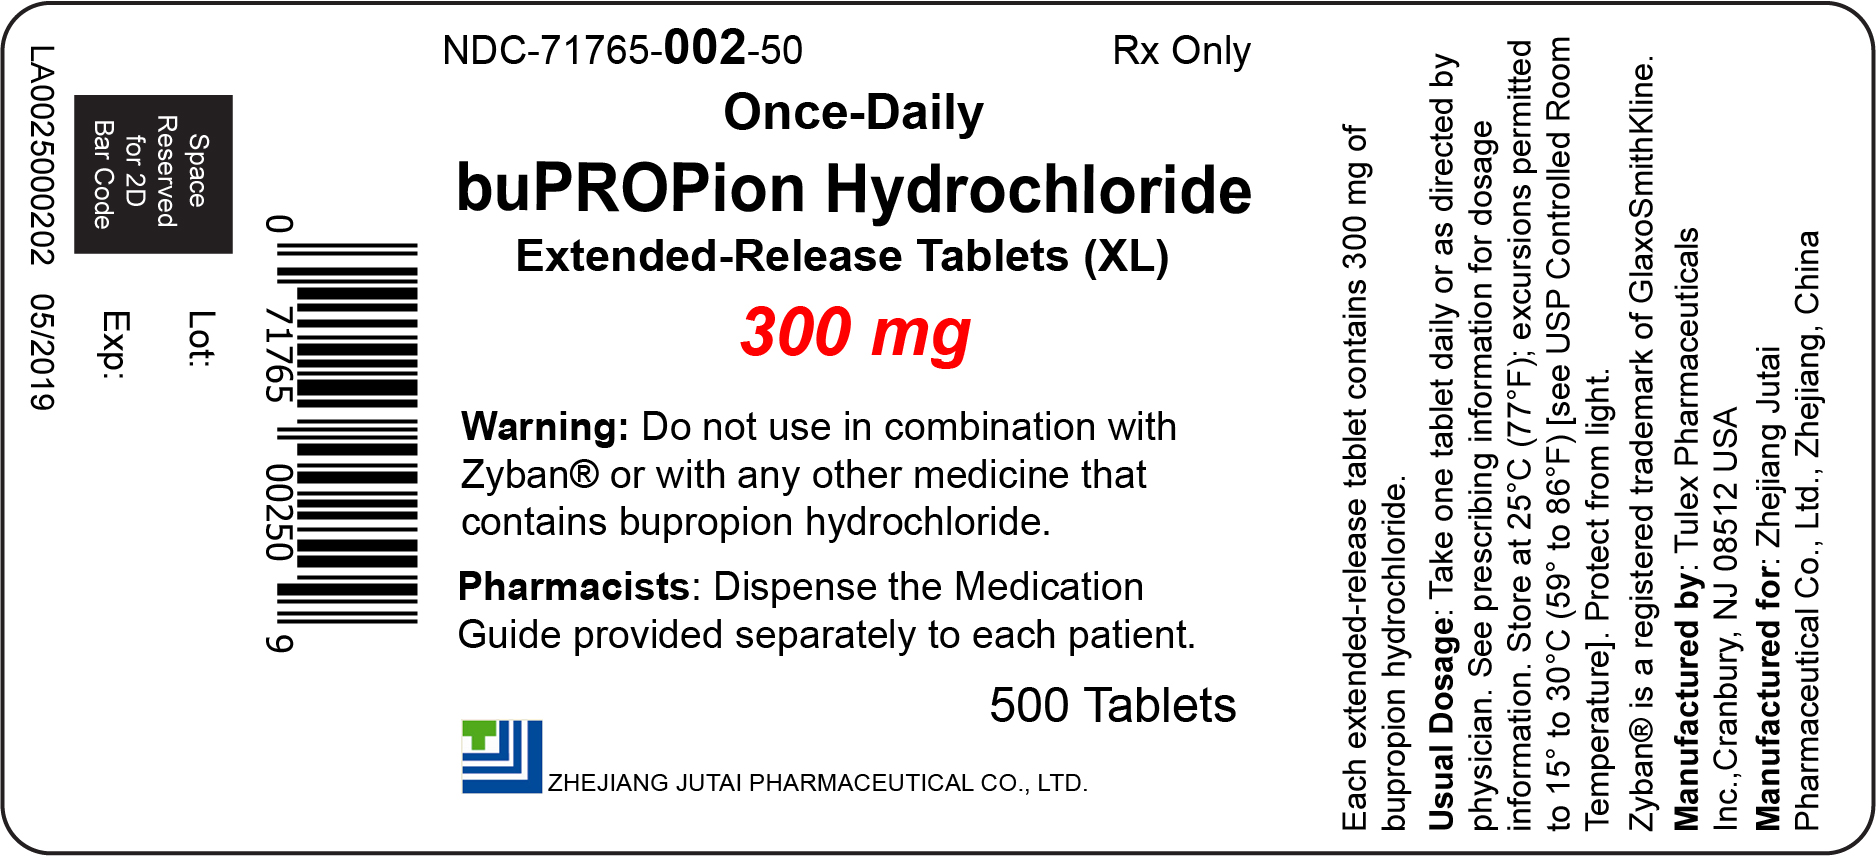 Bupropion Hydrochloride Extended-Release Tablets (XL), 300 mg, 500 count